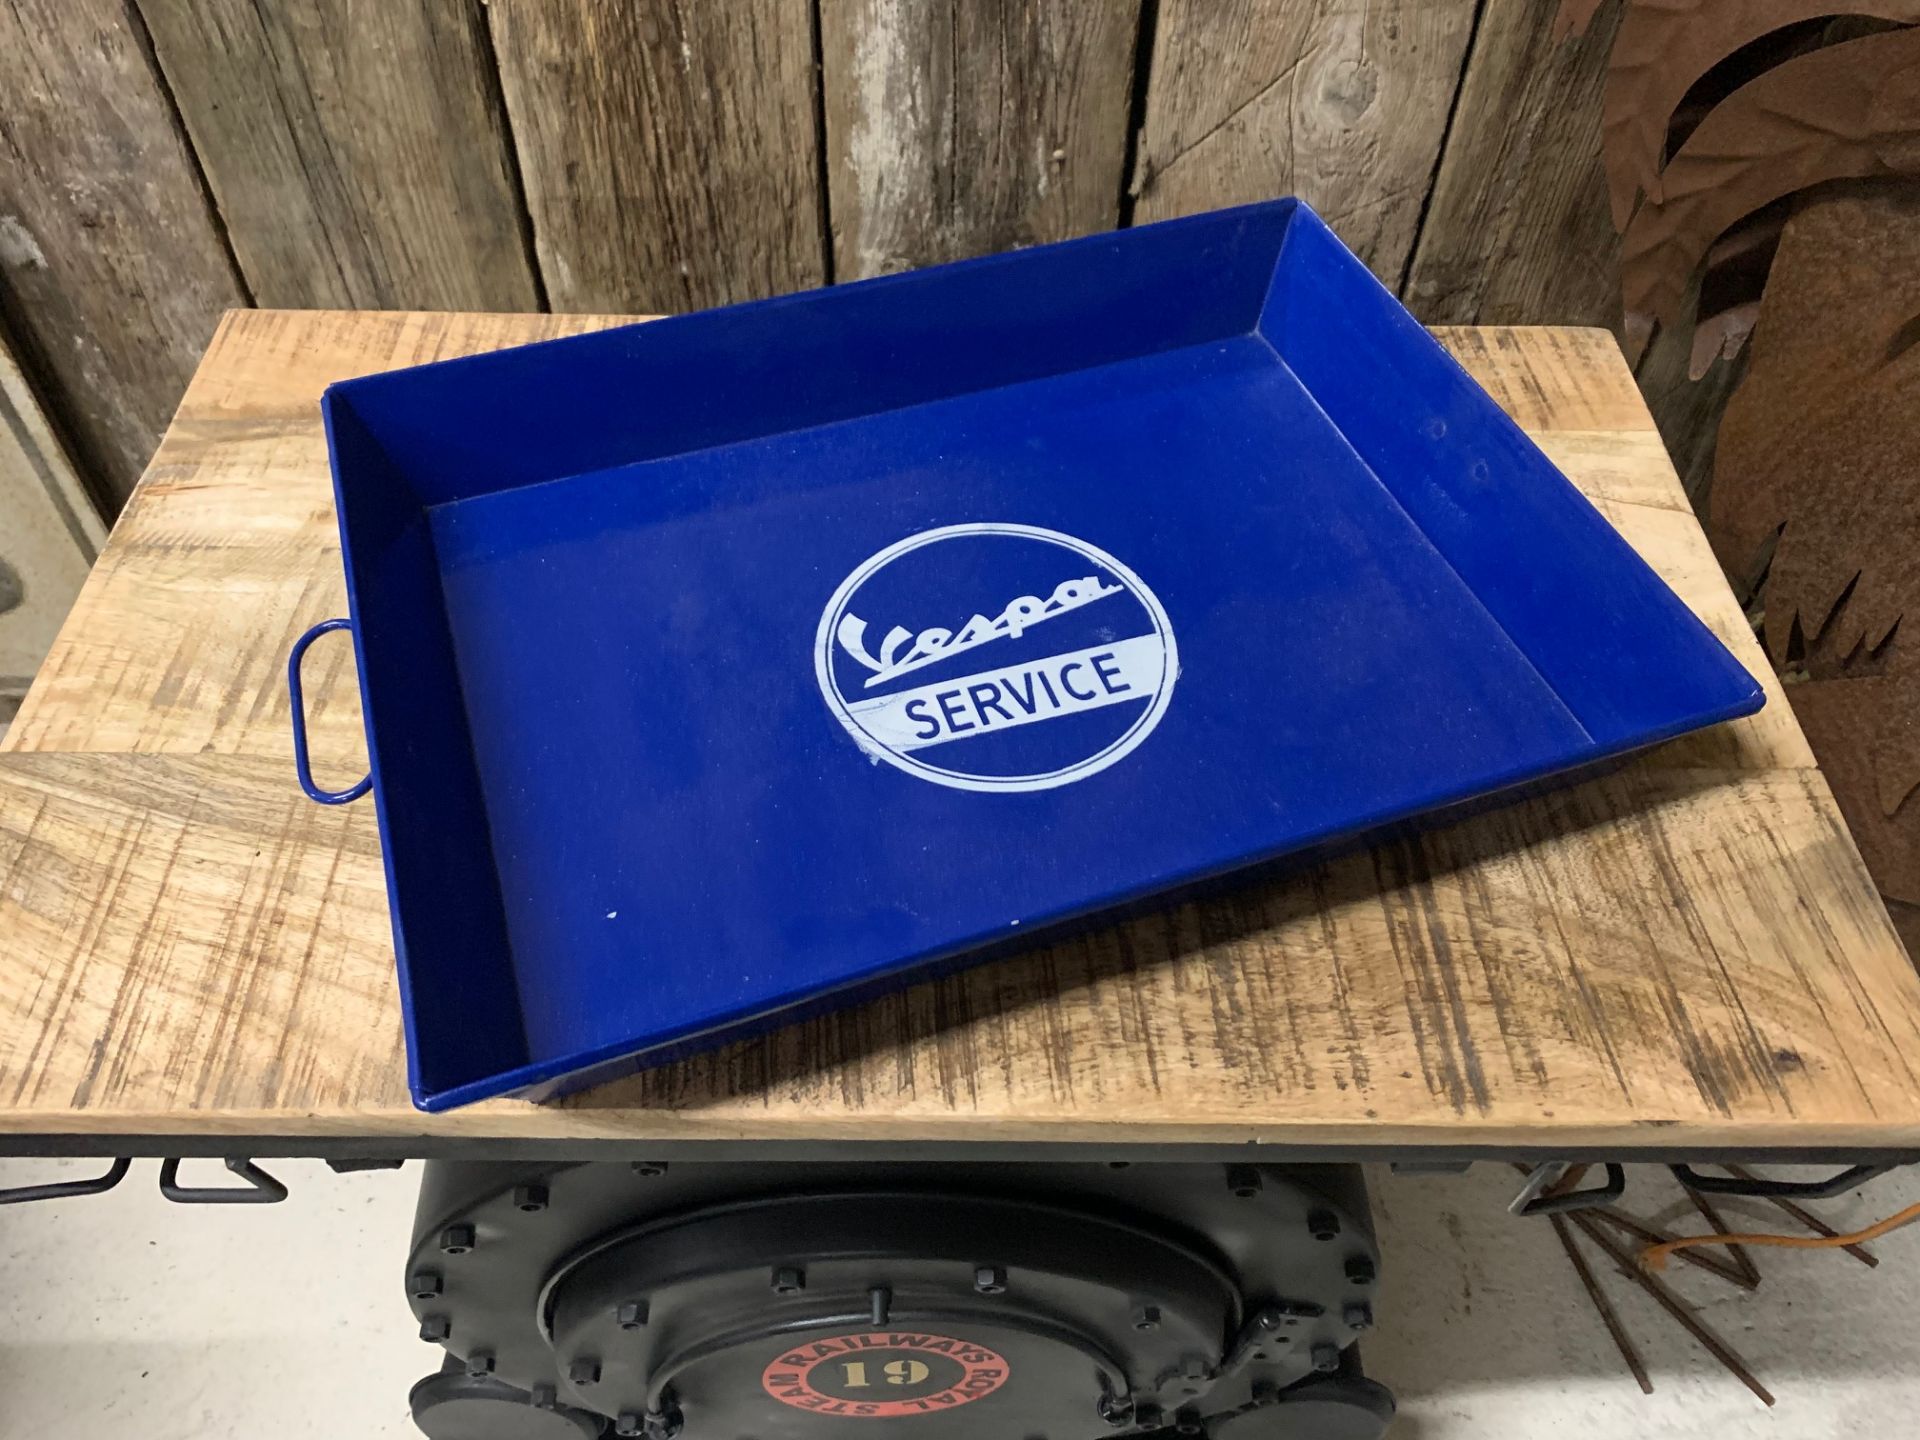 2 x LARGE METAL VESPA SERVING TRAY IN BLUE (APPROX 53CM X 36CM)